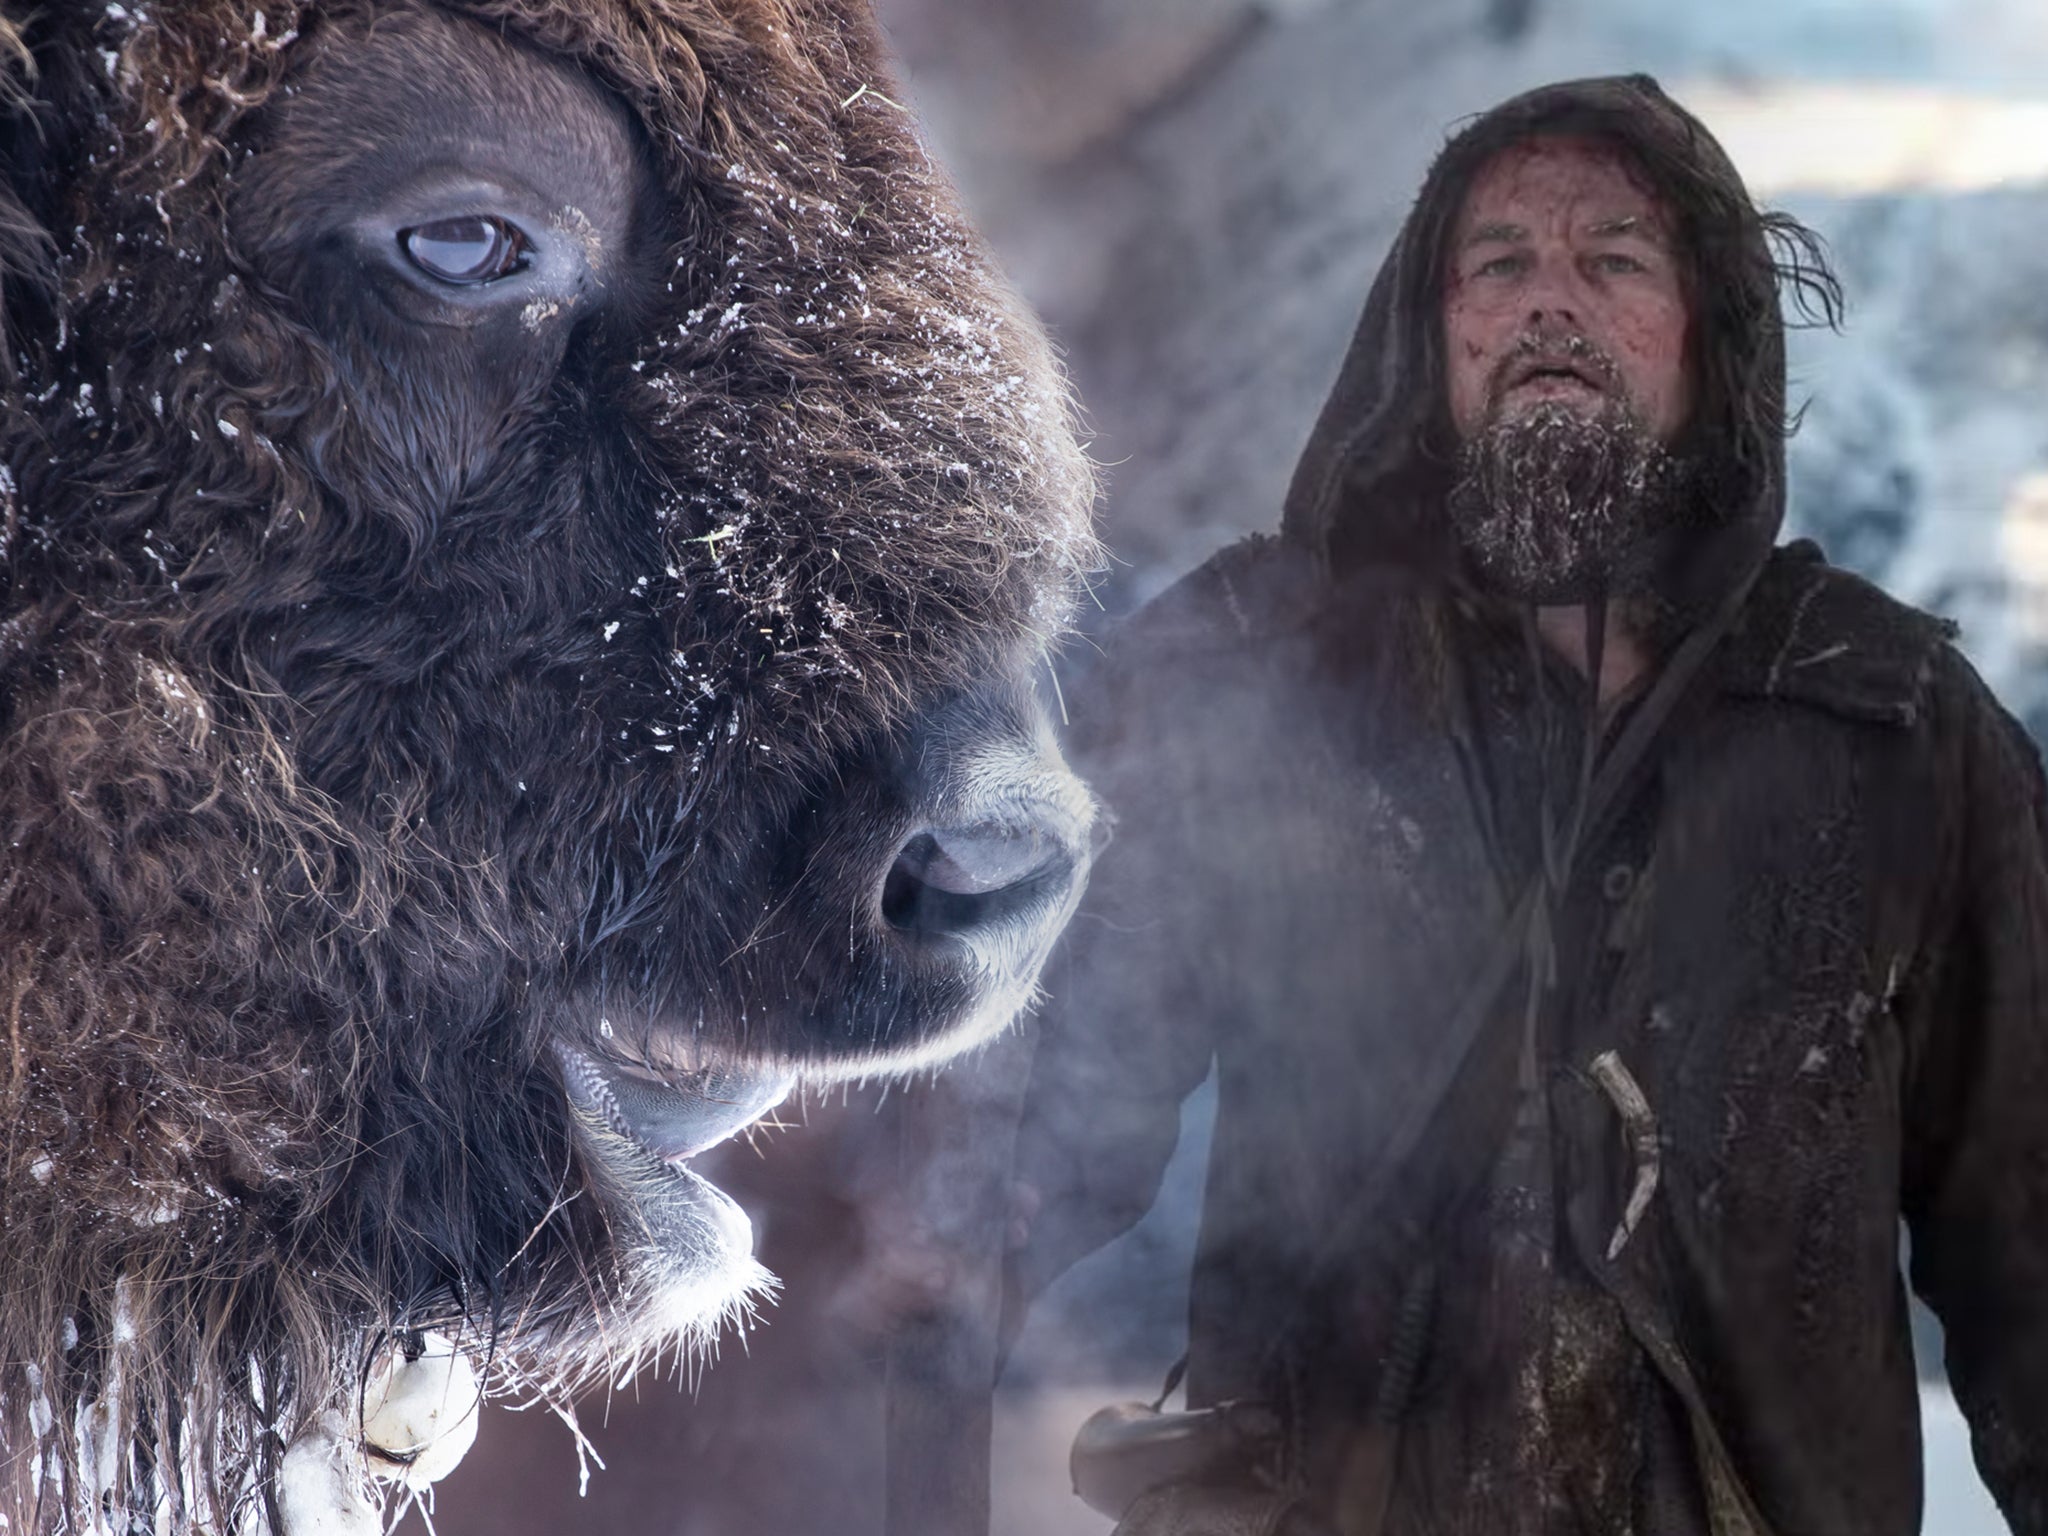 The actor has thrown his support behind a landmark UK project to reintroduce bison